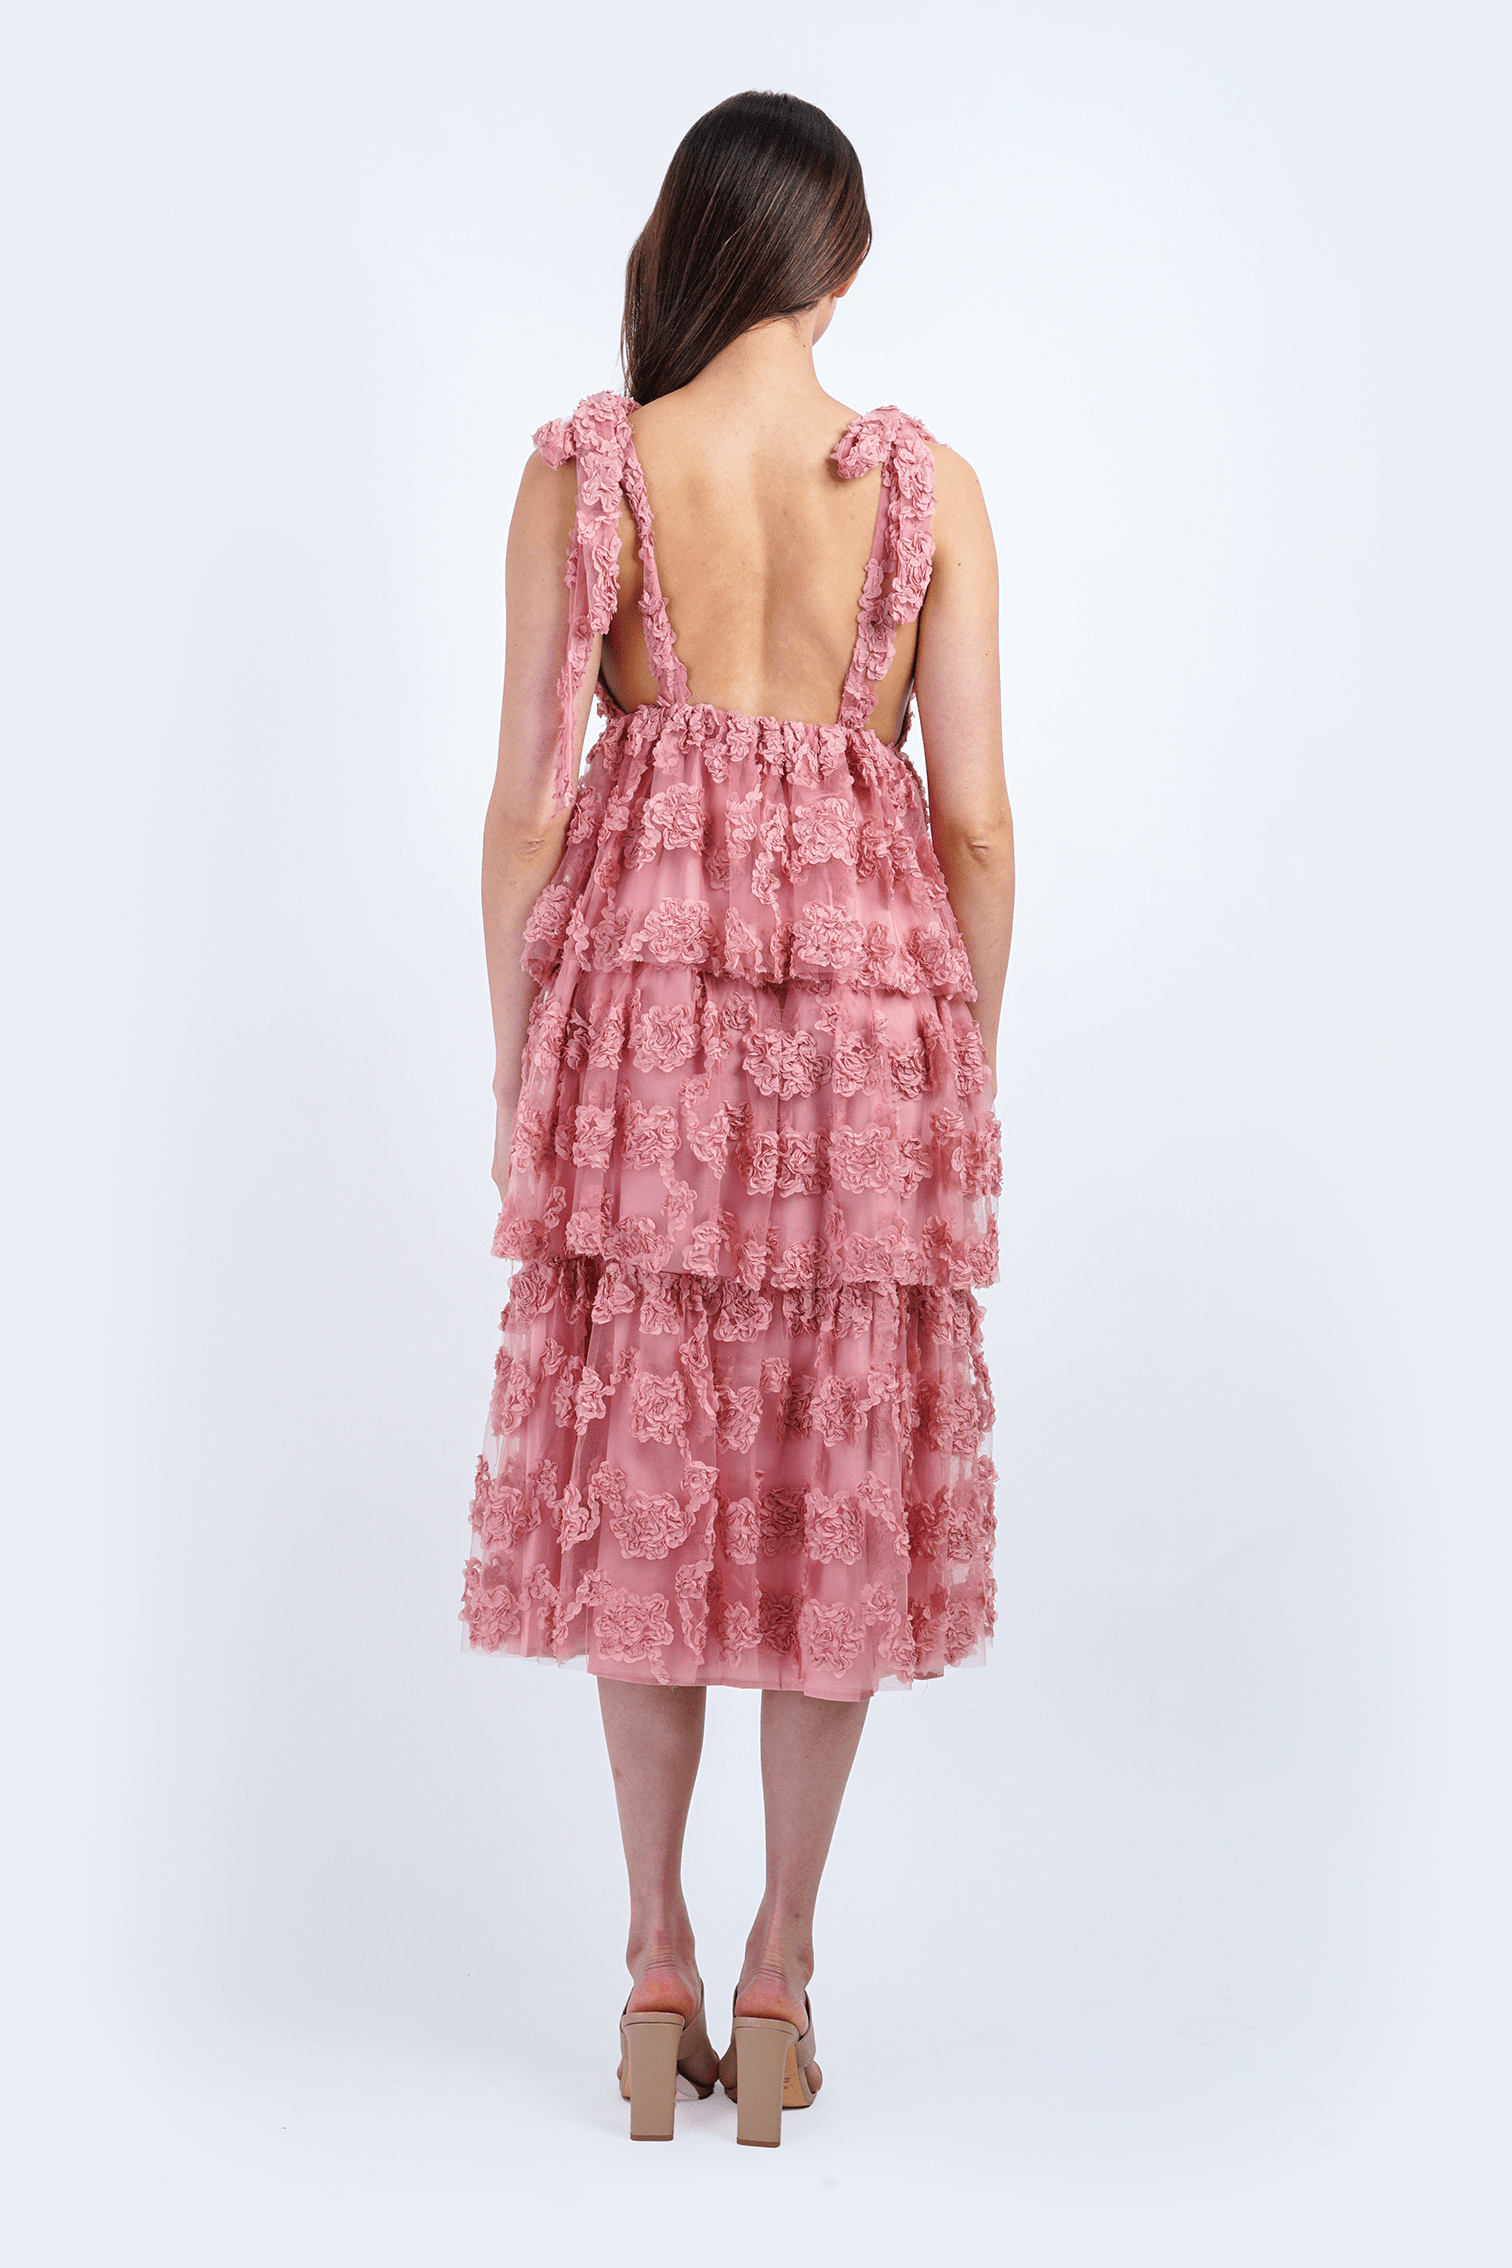 DCD DRESSES Dusty Pink Floral Textured Tiered Dress